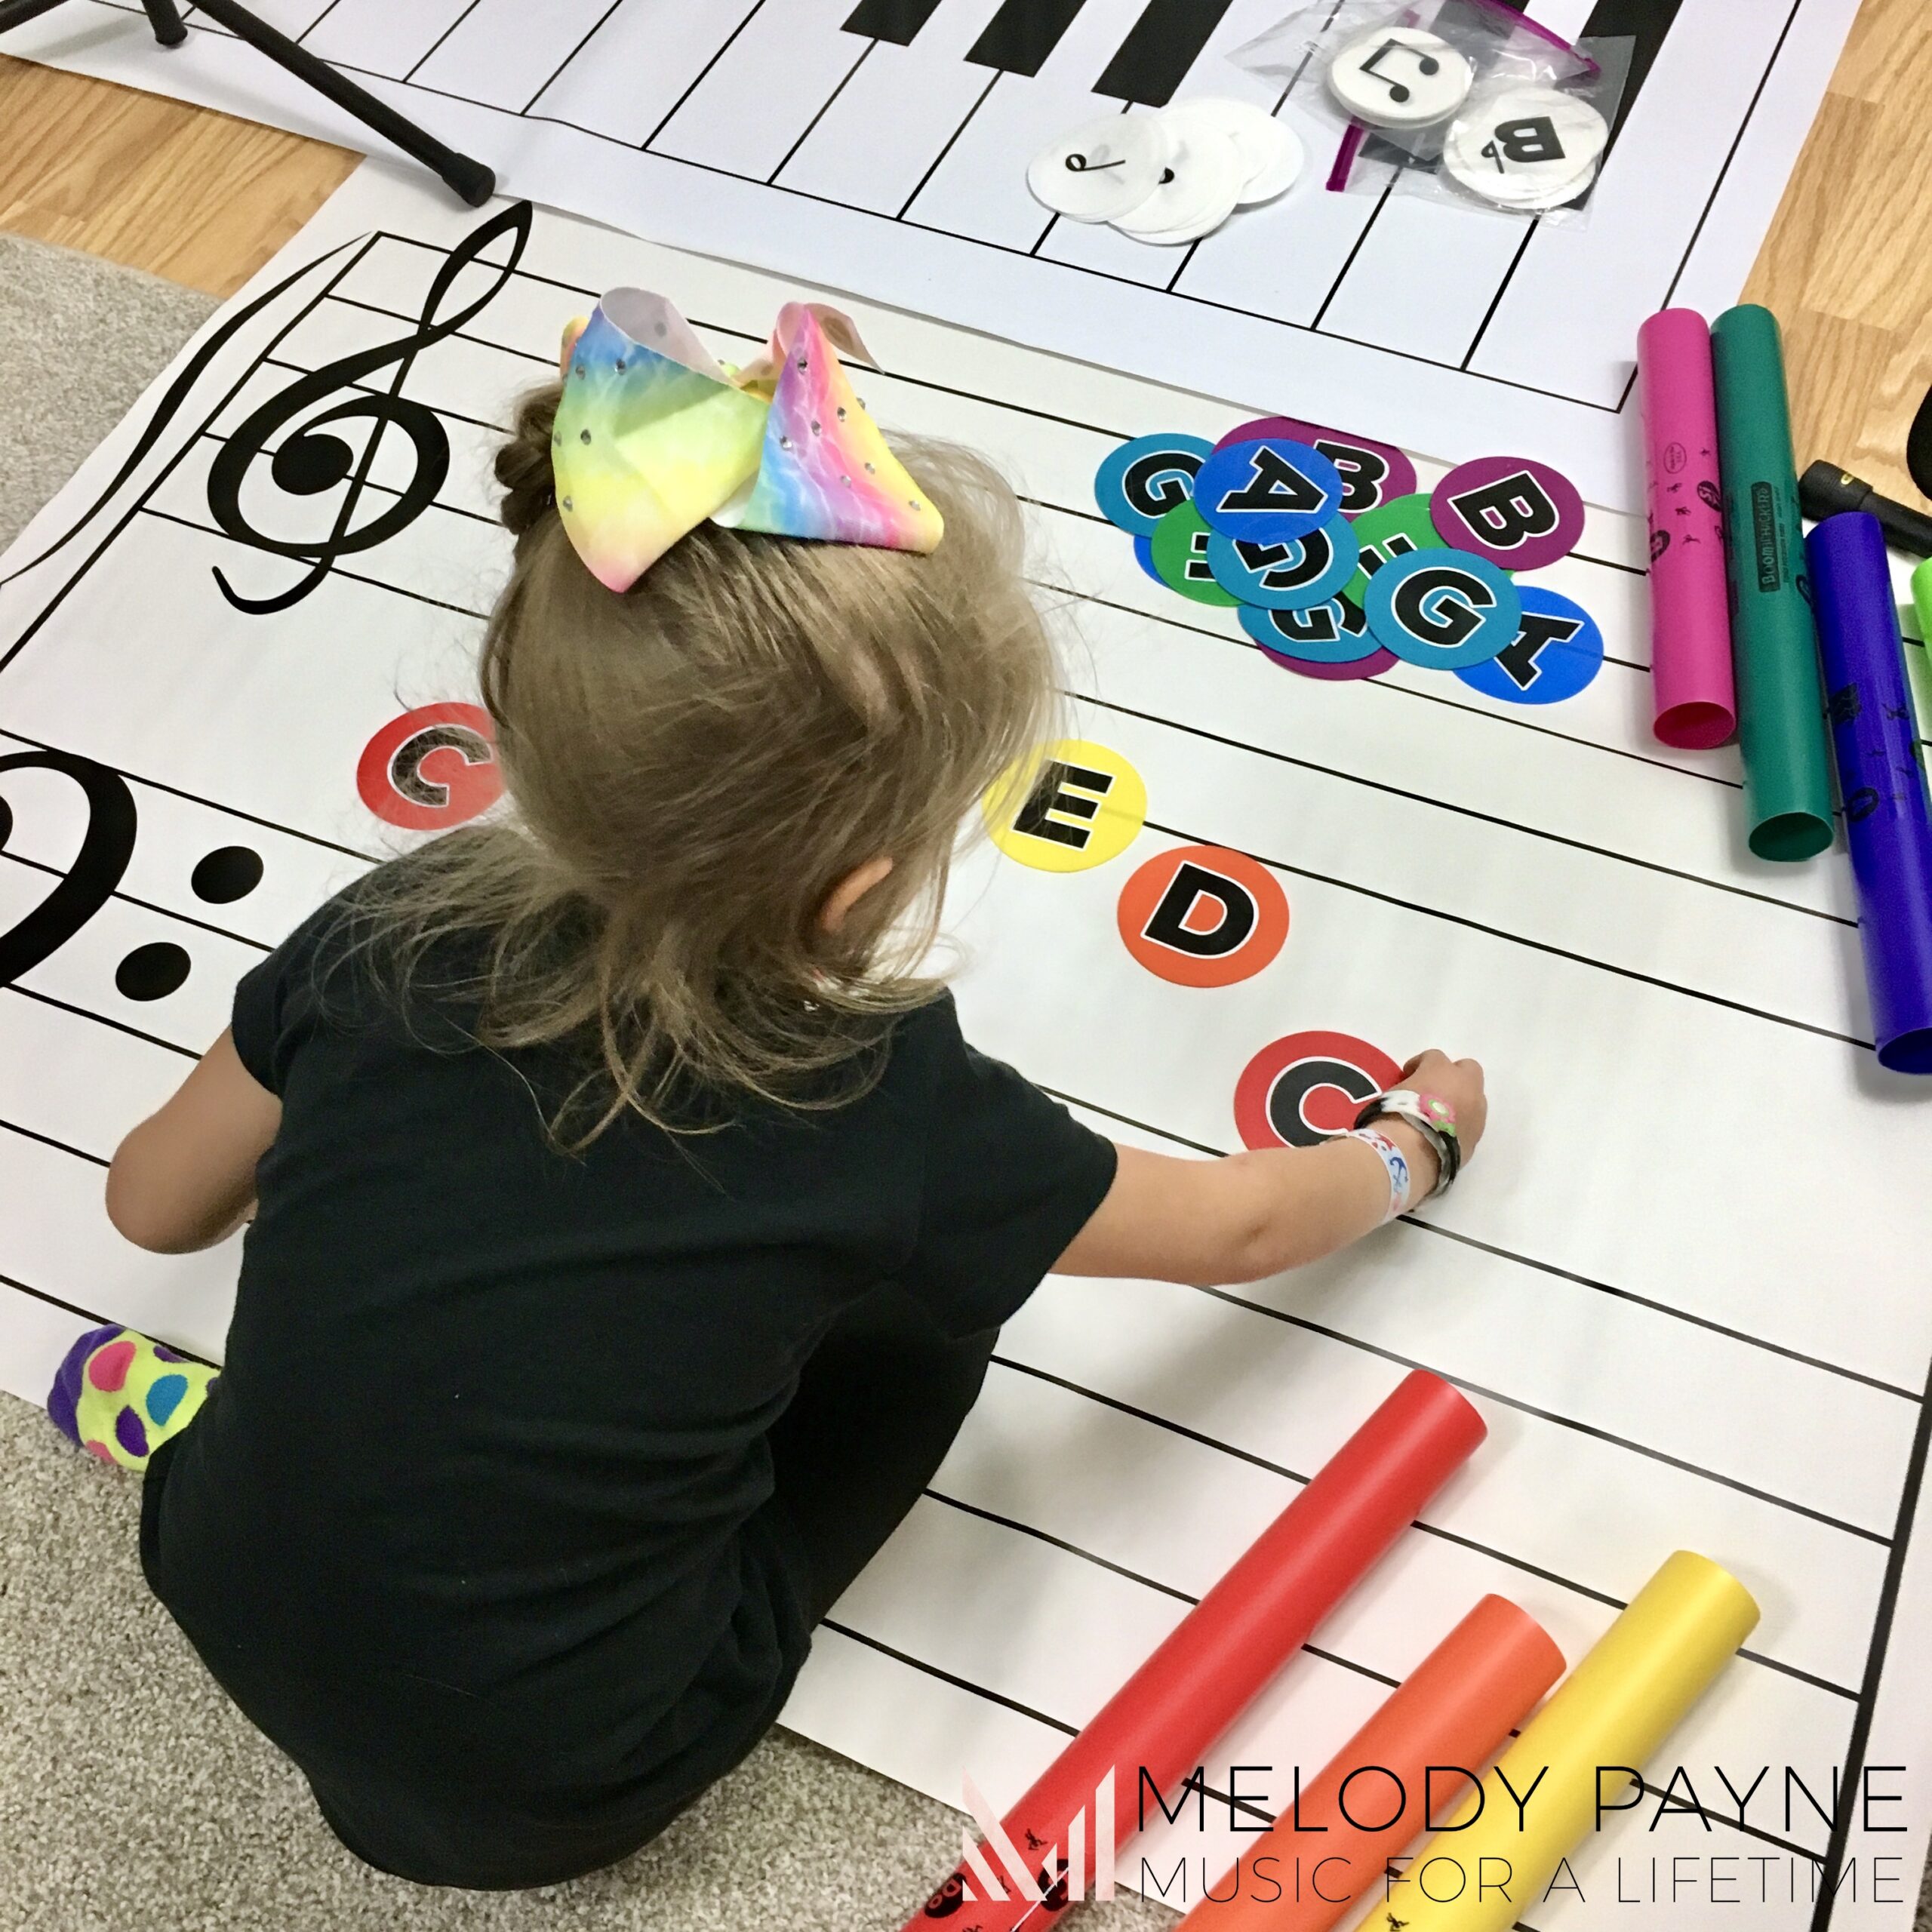 Young piano student composing with the giant floor staff